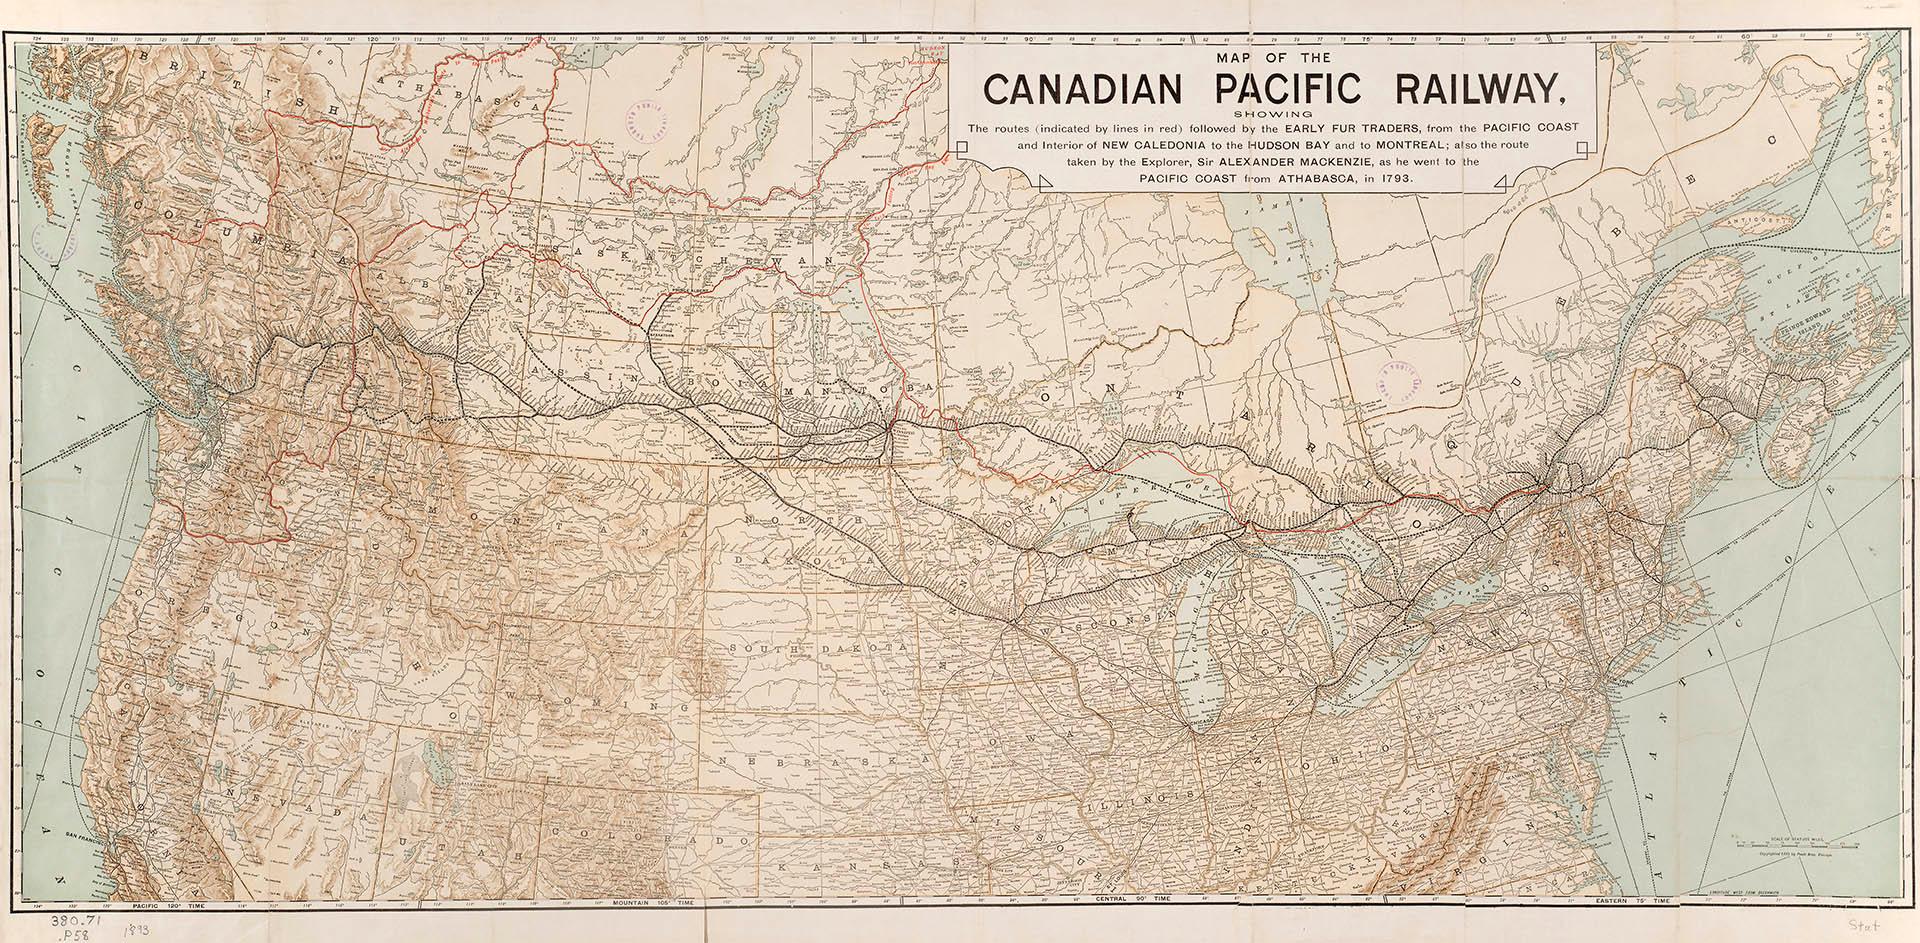 Map of the Canadian Pacific Railway, showing the routes (indicated by lines in red) followed by the early fur traders